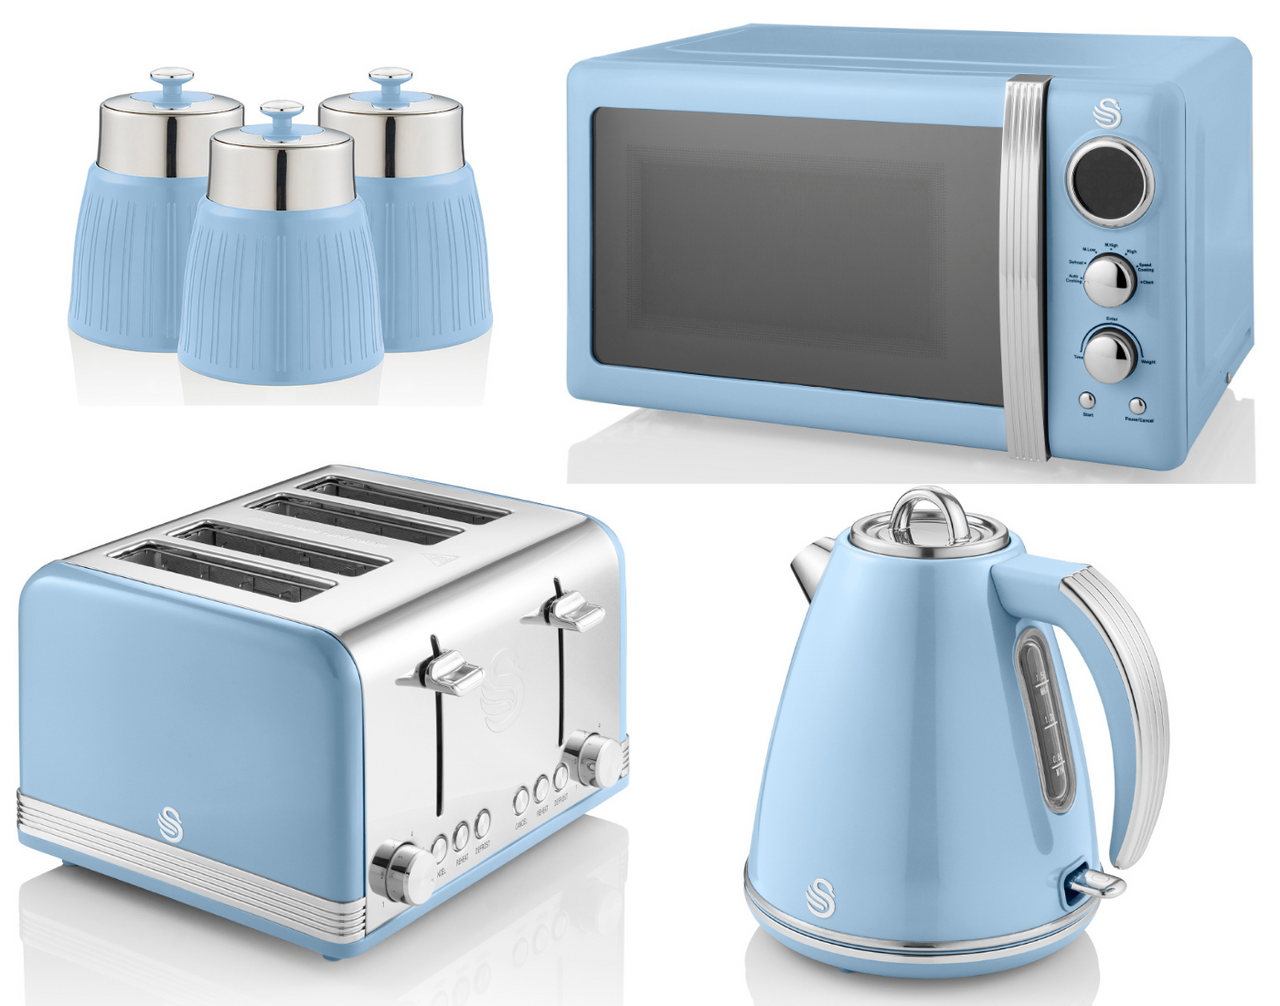 Swan Retro Kitchen Set of 6 including Blue 1.5L 3KW Jug Kettle, 4 Slice Toaster, 800W 20L Digital Microwave & Set of 3 Tea, Coffee & Sugar Canisters in Blue